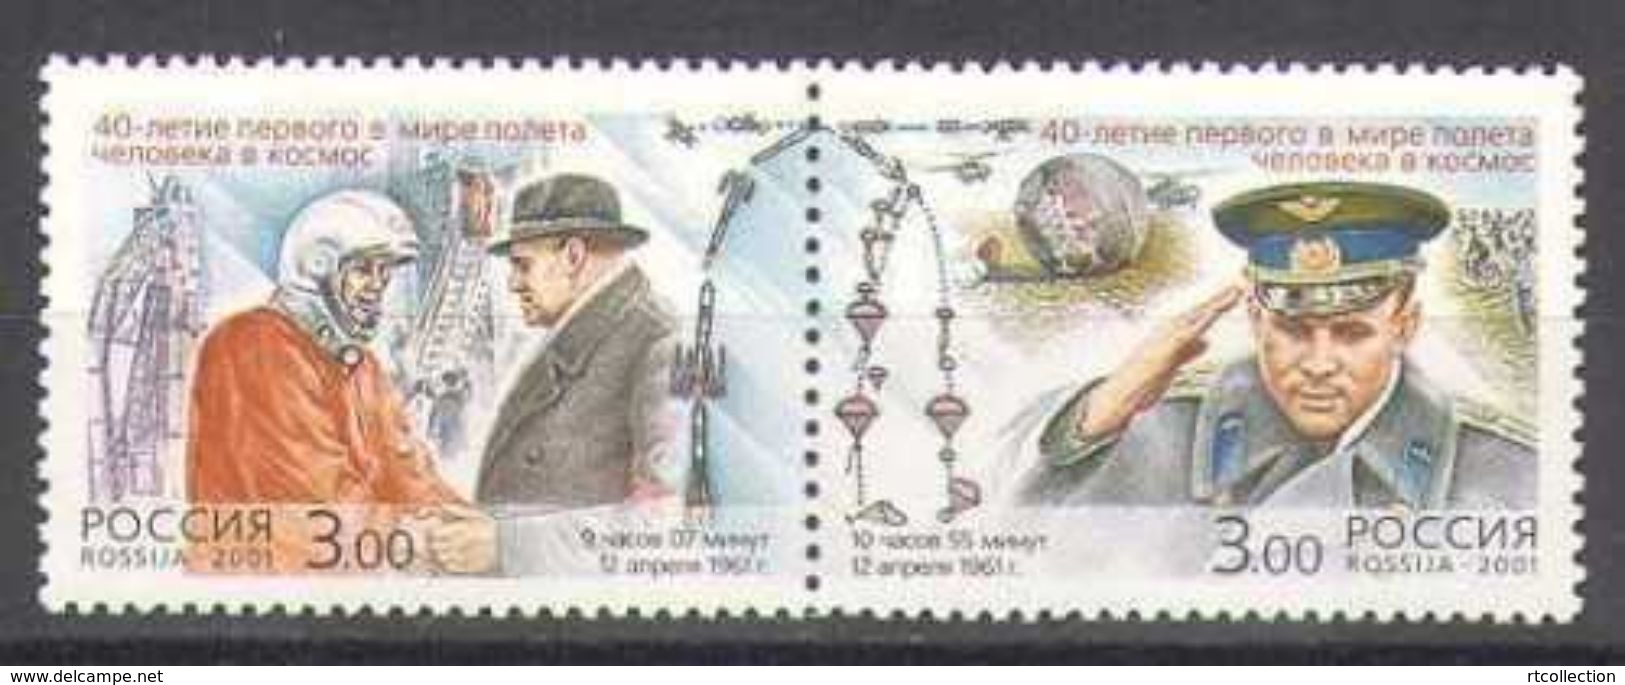 Russia 2001 First Manned Space Flight 40Y Astronaut Gagarin People Rocket Helicopters Sciences Stamps Michel 908-909Zd - Russia & USSR